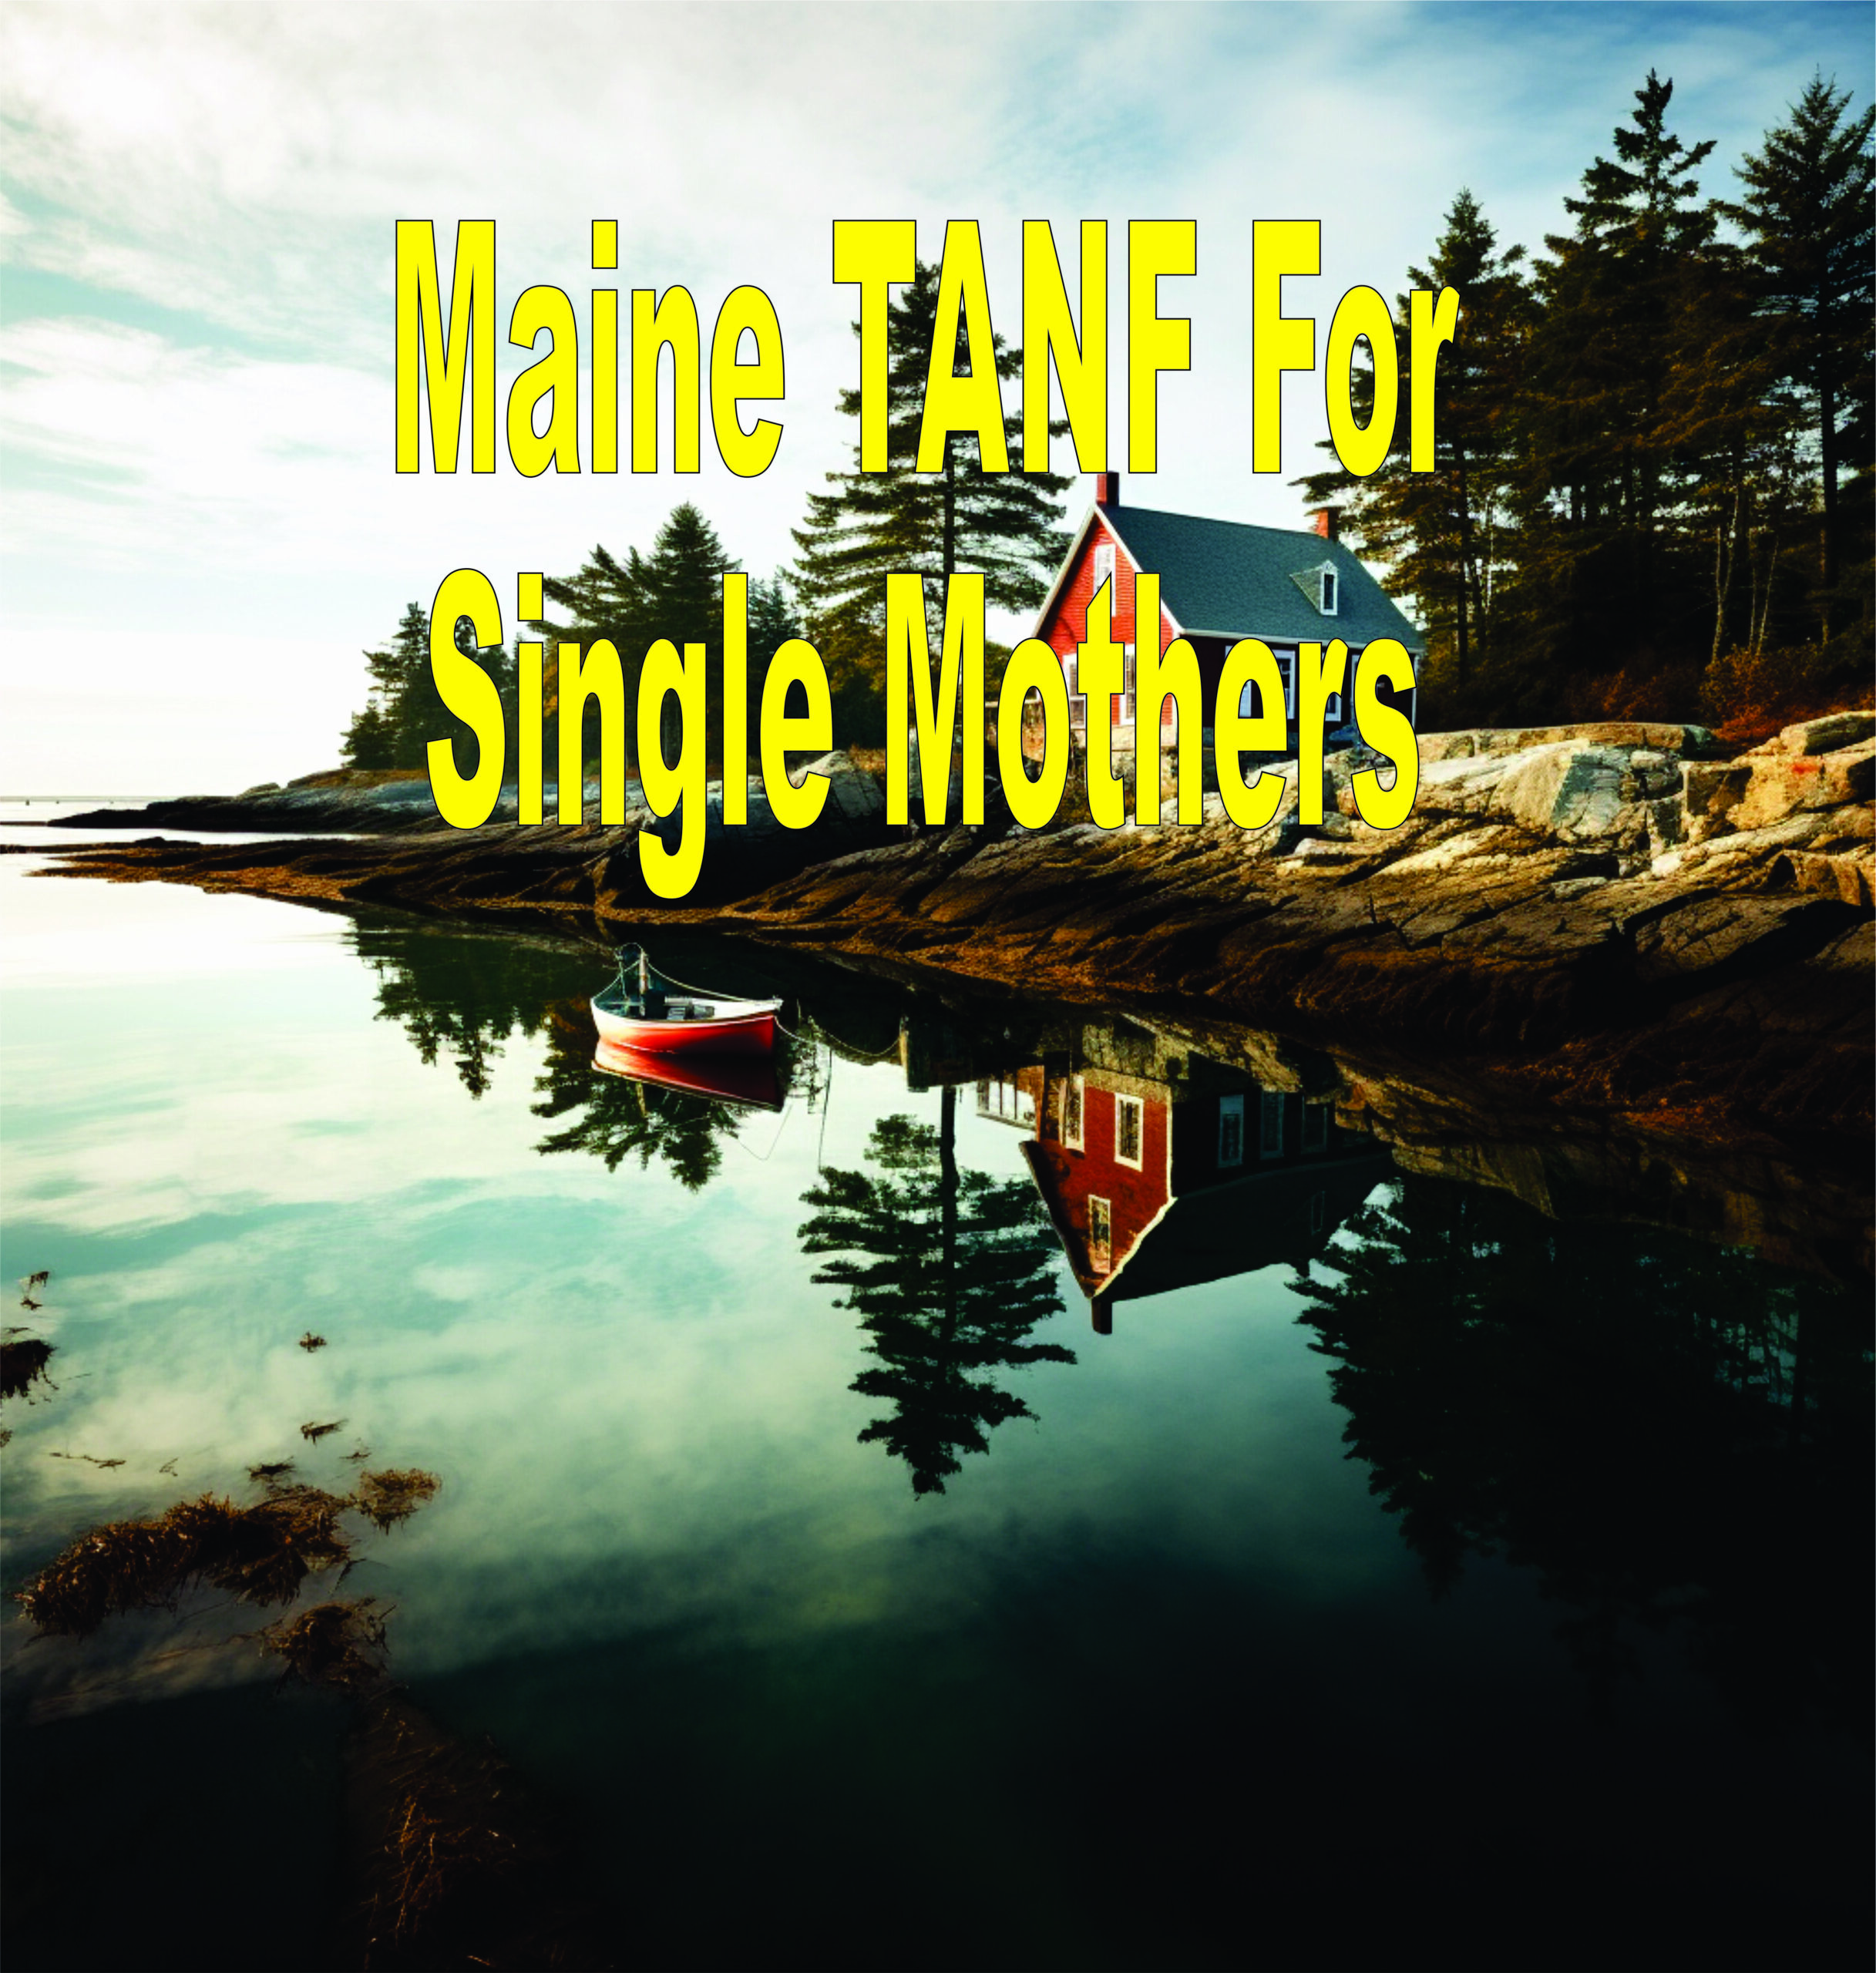 Maine Tanf For Single Mothers